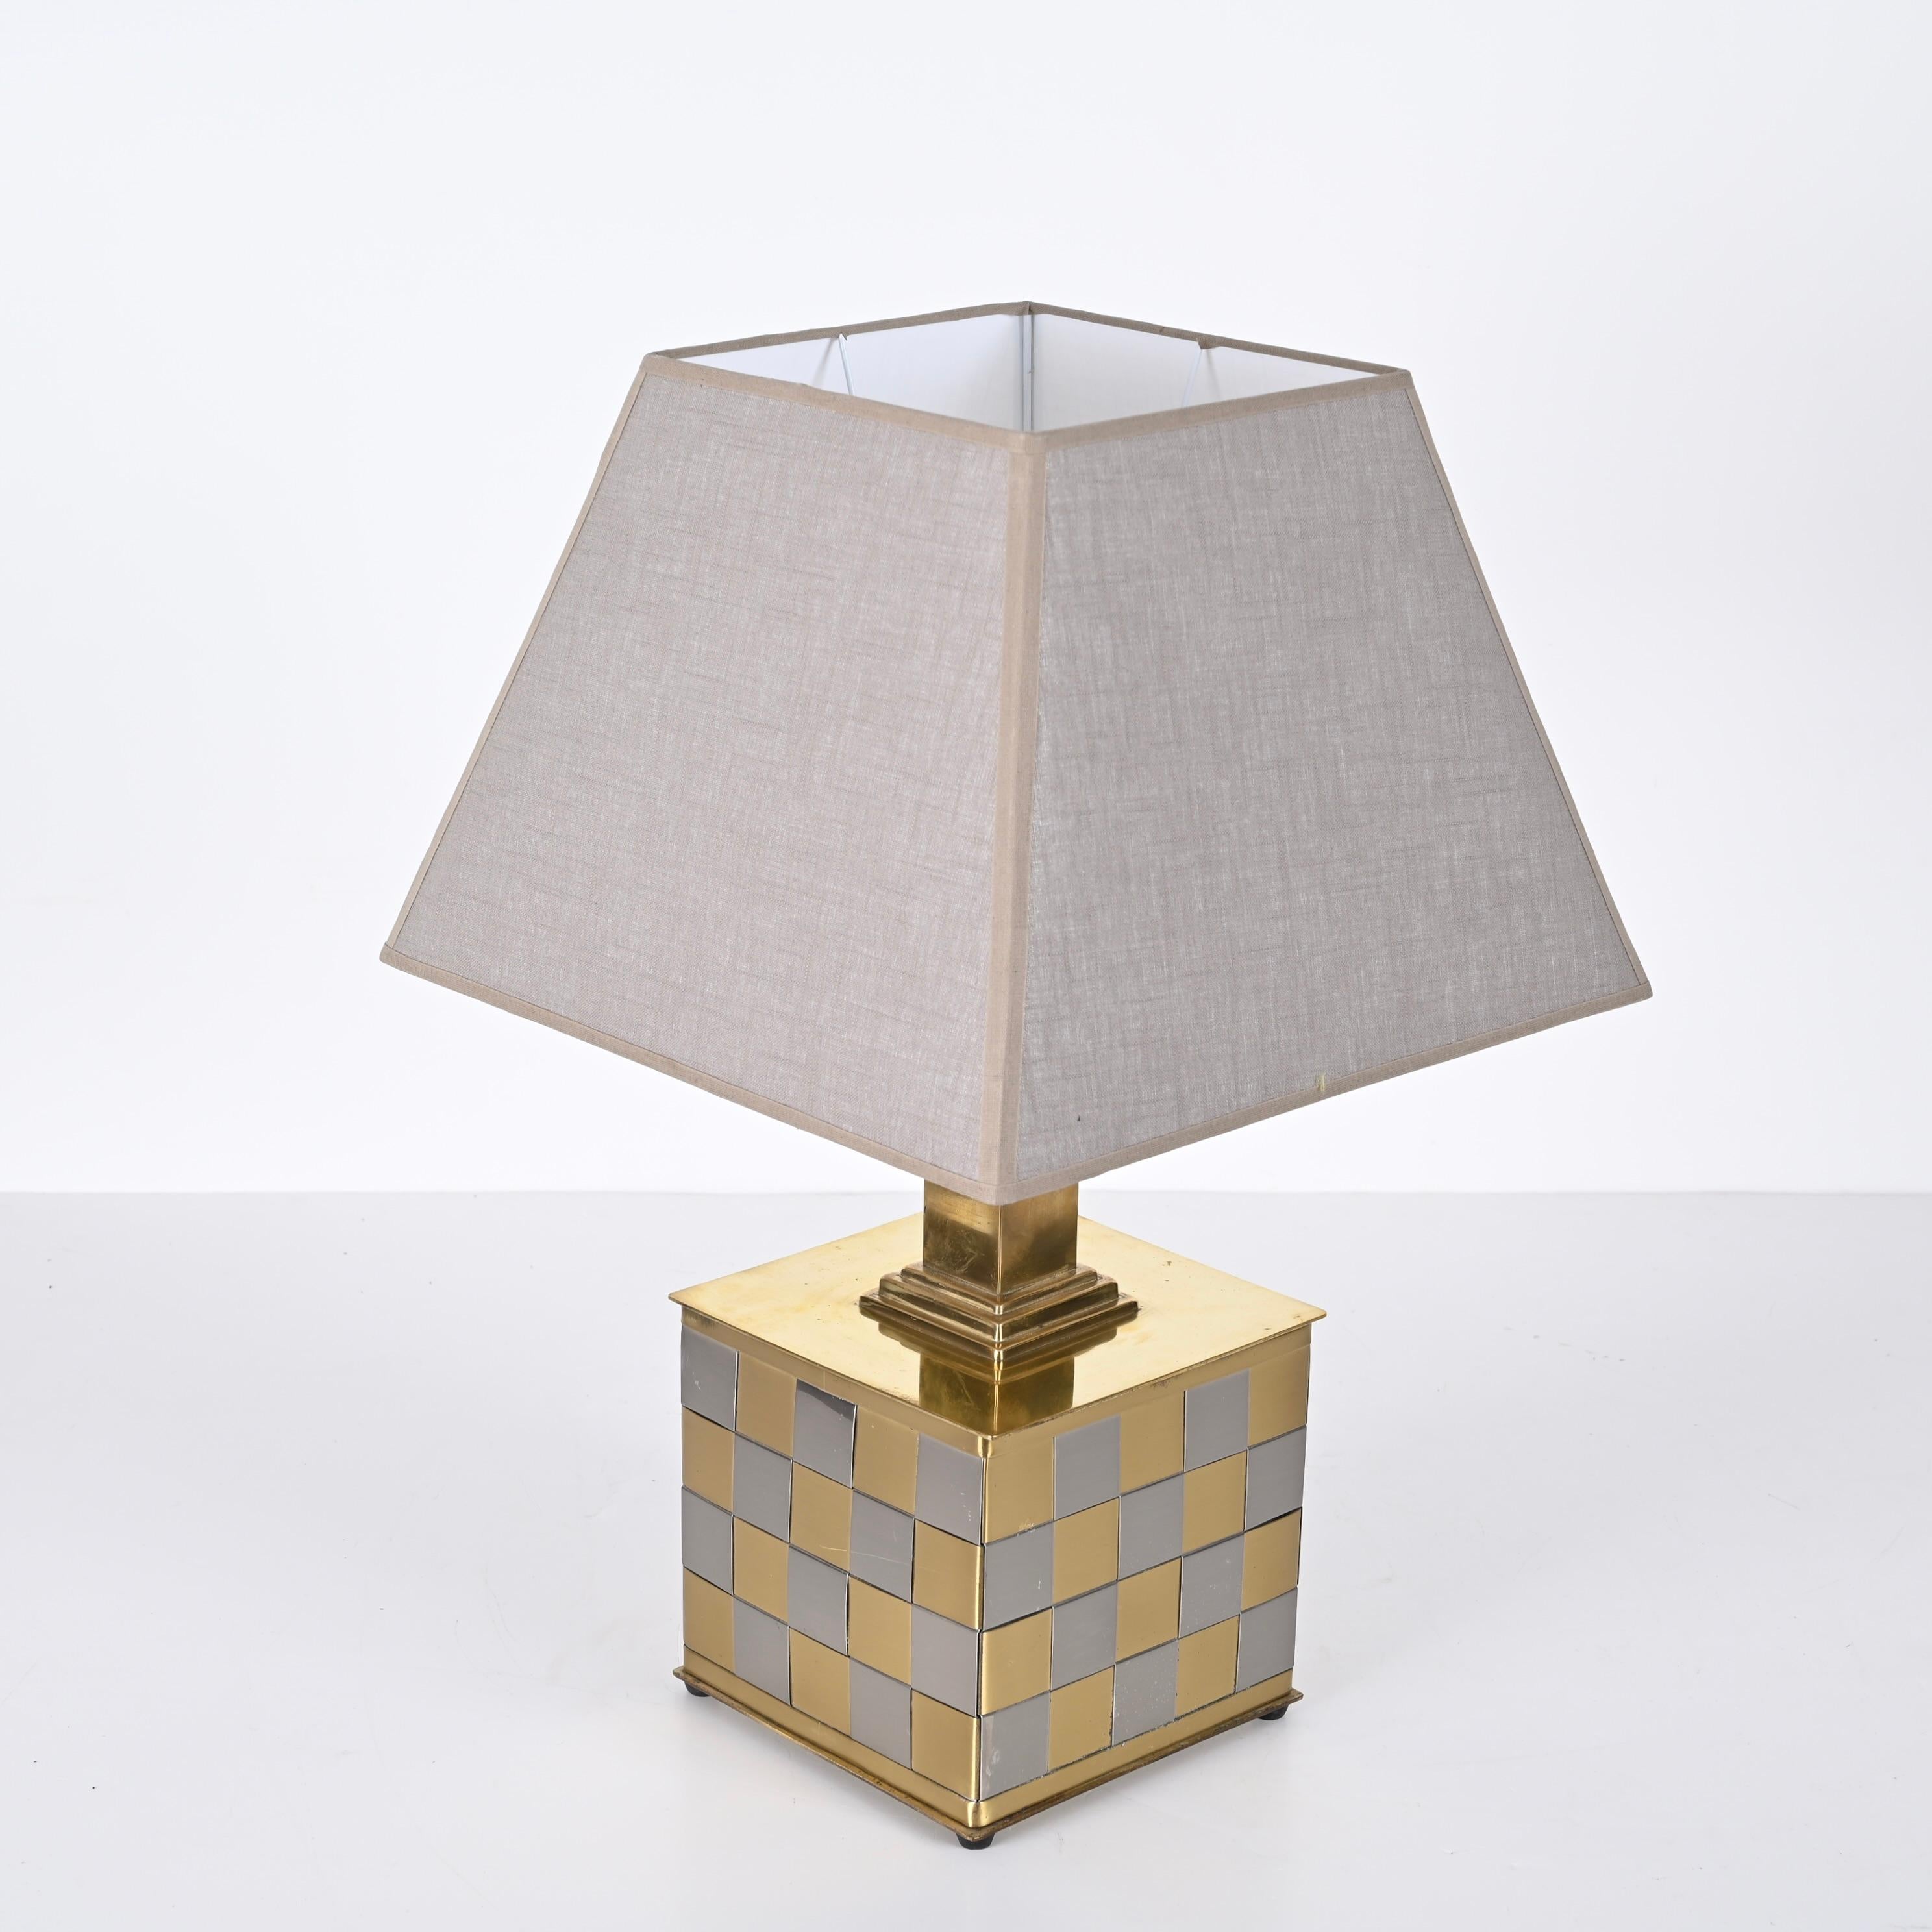 Midcentury Brass and Chrome Table Lamp, Willy Rizzo, Italy 1970s For Sale 4